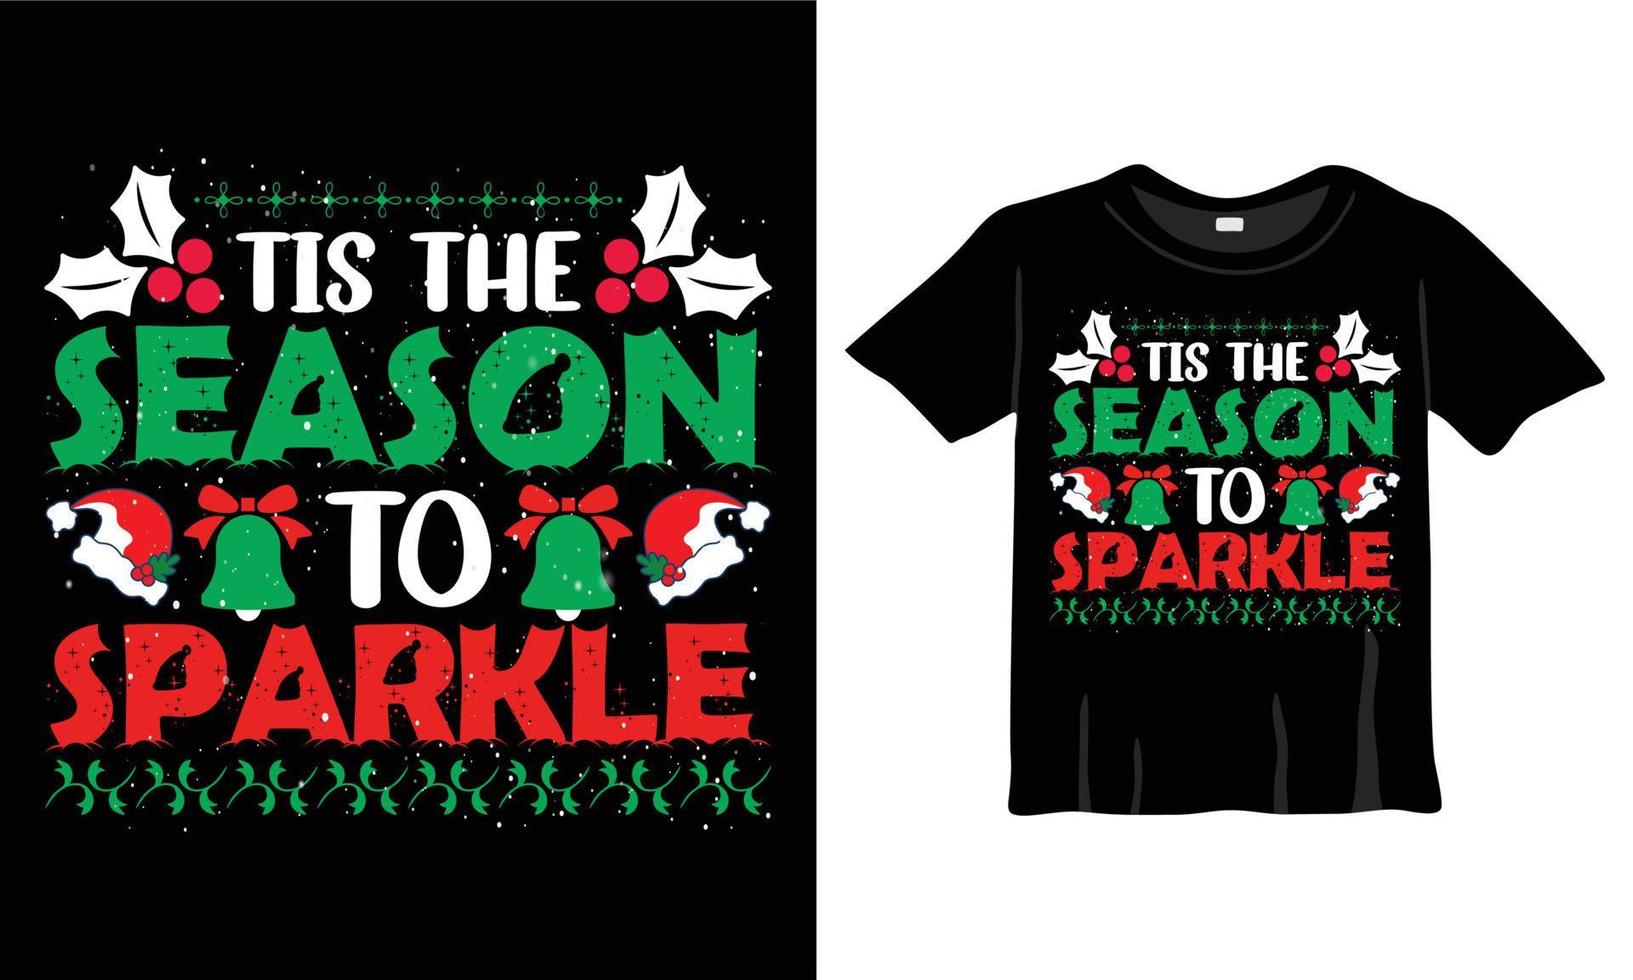 Christmas T-Shirt Design Template on the quote 'Tis the season to sparkle' for Christmas Celebration. Good for Greeting cards, t-shirts, mugs, and gifts. For Men, Women, and Baby clothing vector